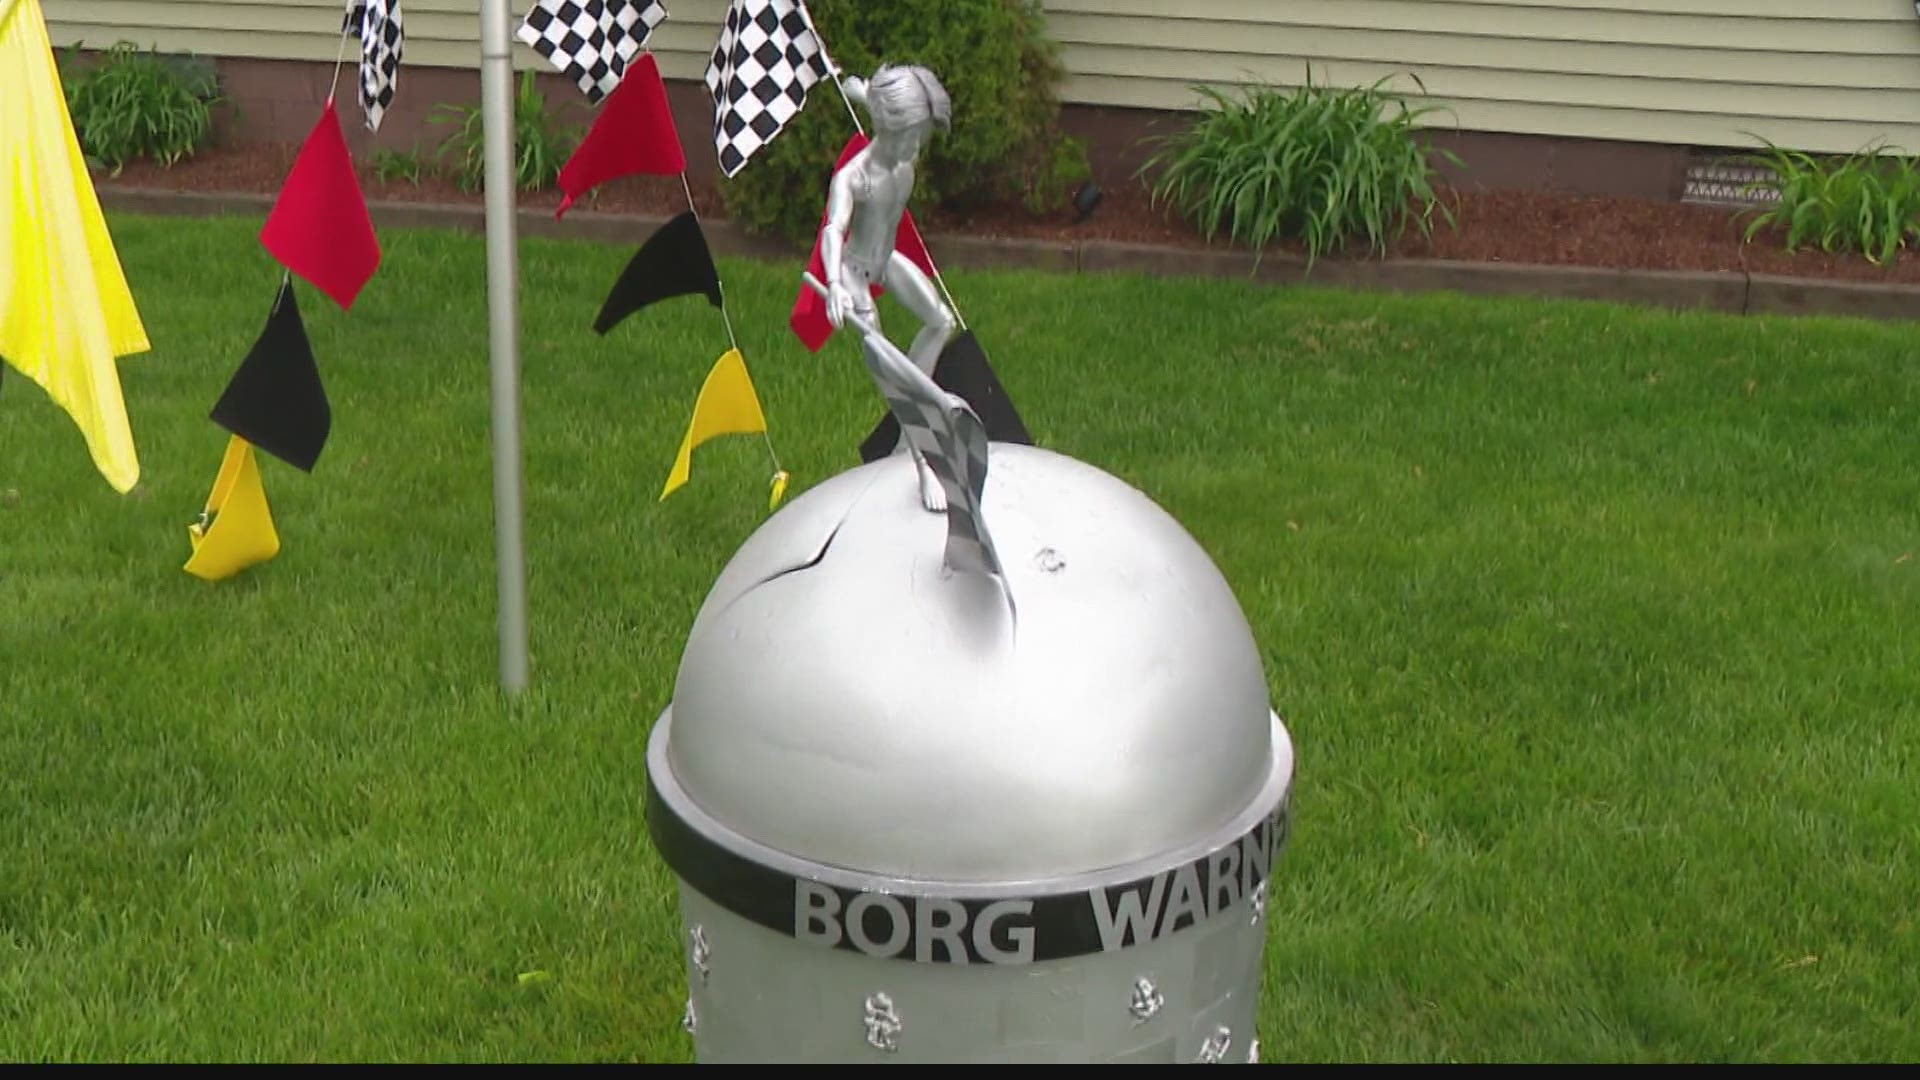 We're telling you how IMS is encouraging Indy 500 fans to decorate their homes in race-themed fashion and join a digital map.